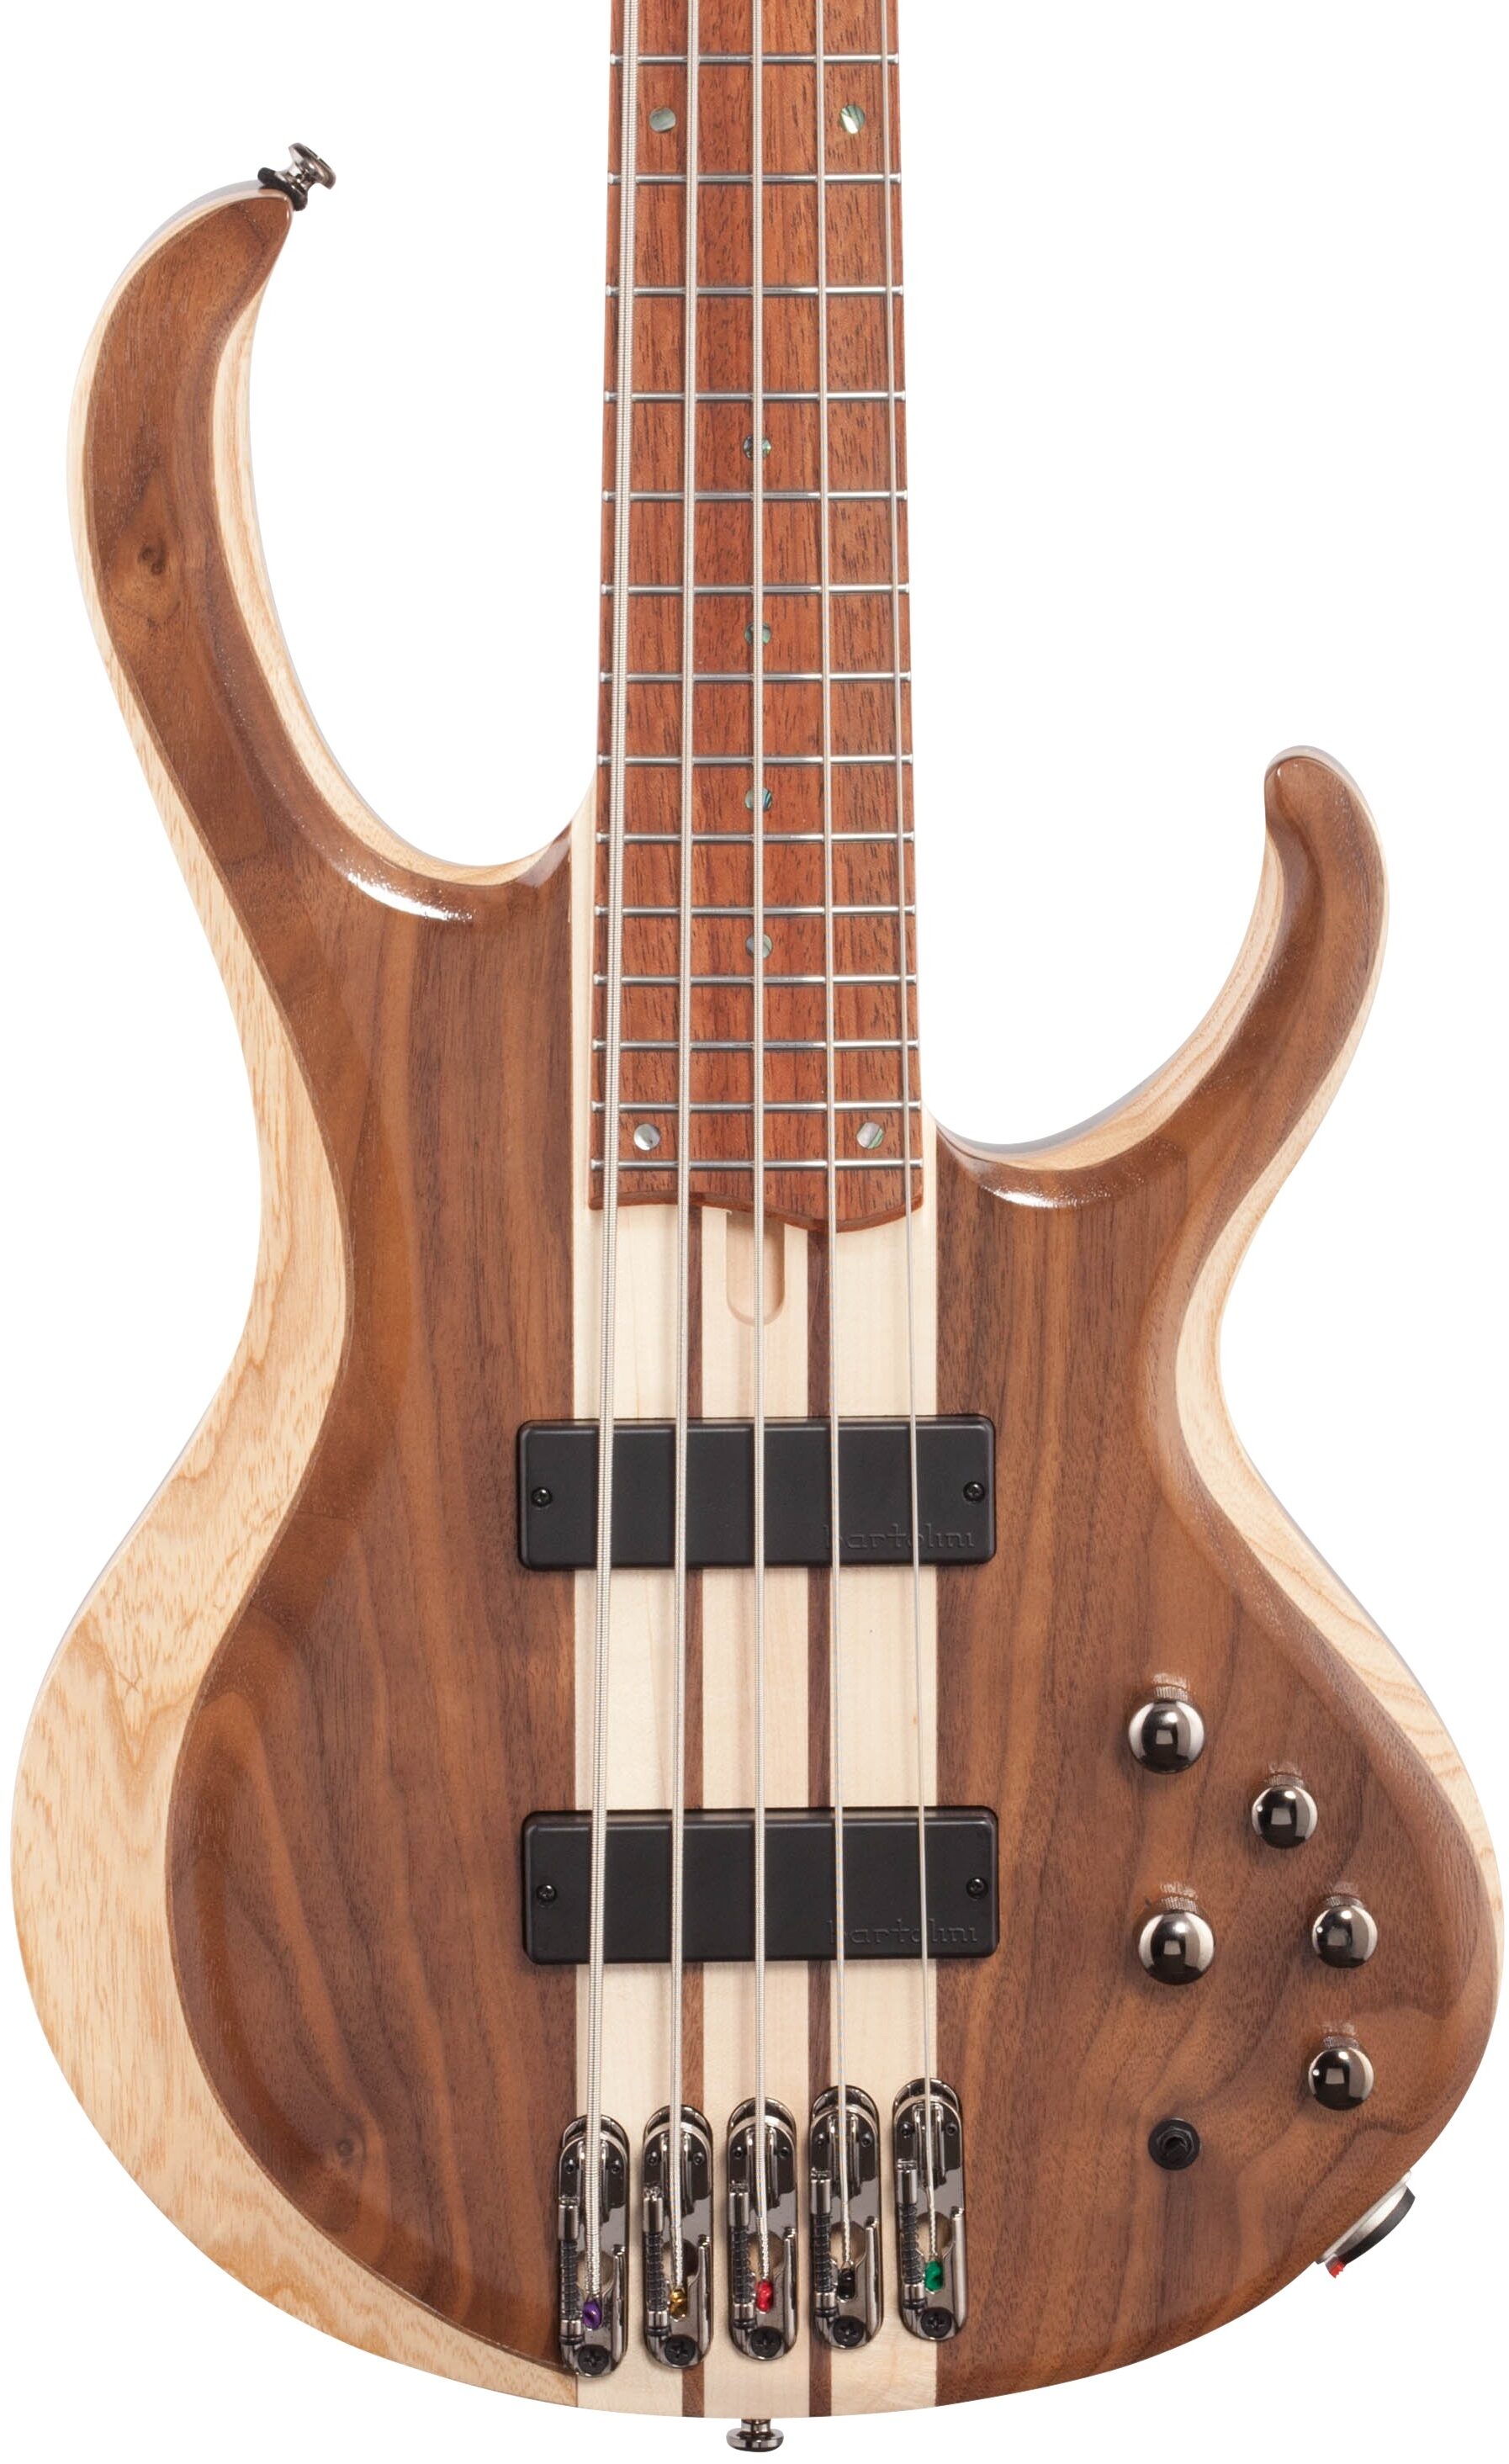 Ibanez BTB745 Electric Bass, 5-String | zZounds